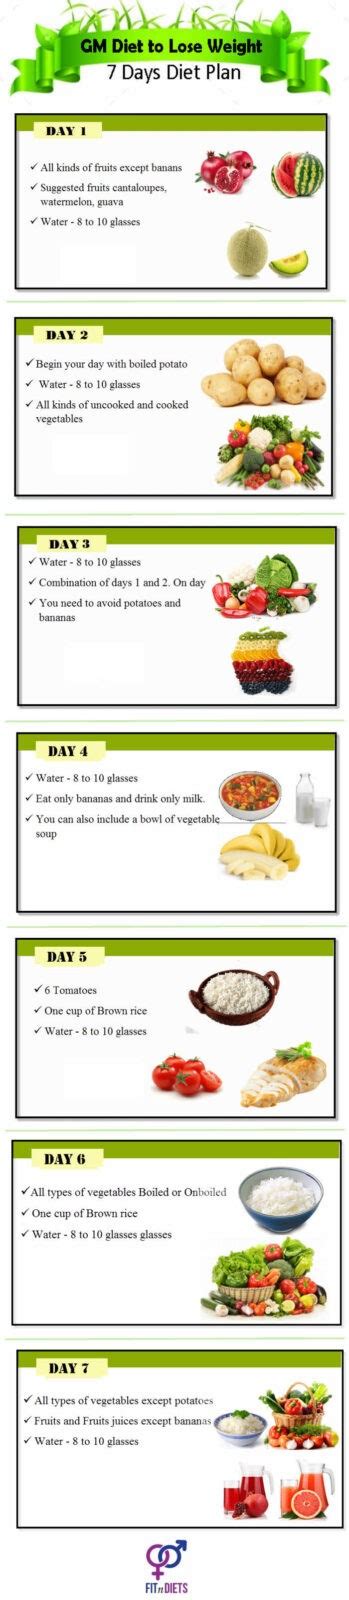 Gm Diet Chart And Menu How To Lose Weight In 7 Days